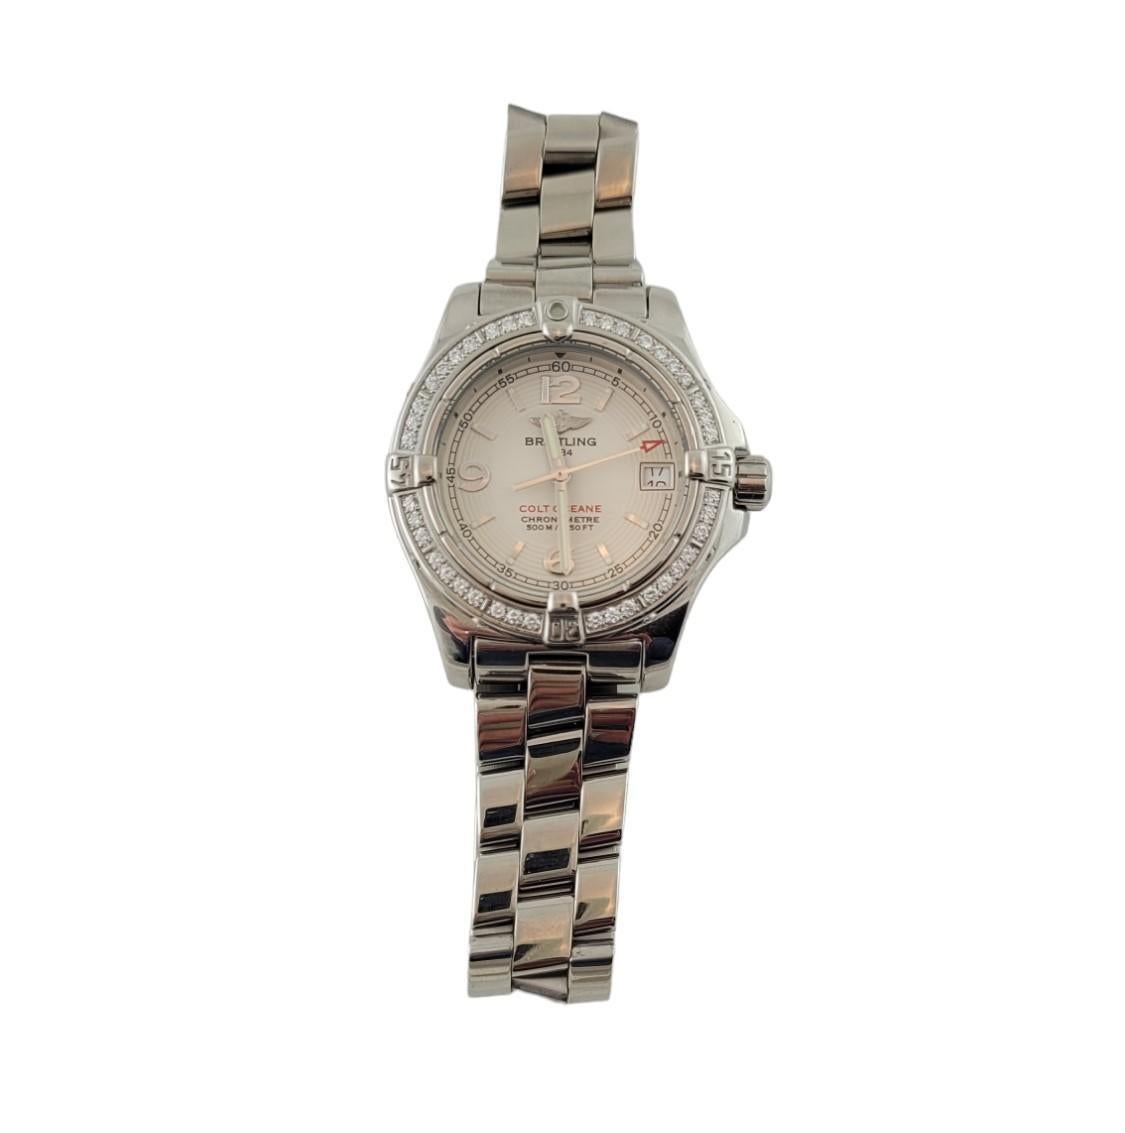 2007 Breitling Ladies Colt Oceane Diamond Watch A77380 Box/Papers # 17227 For Sale 2